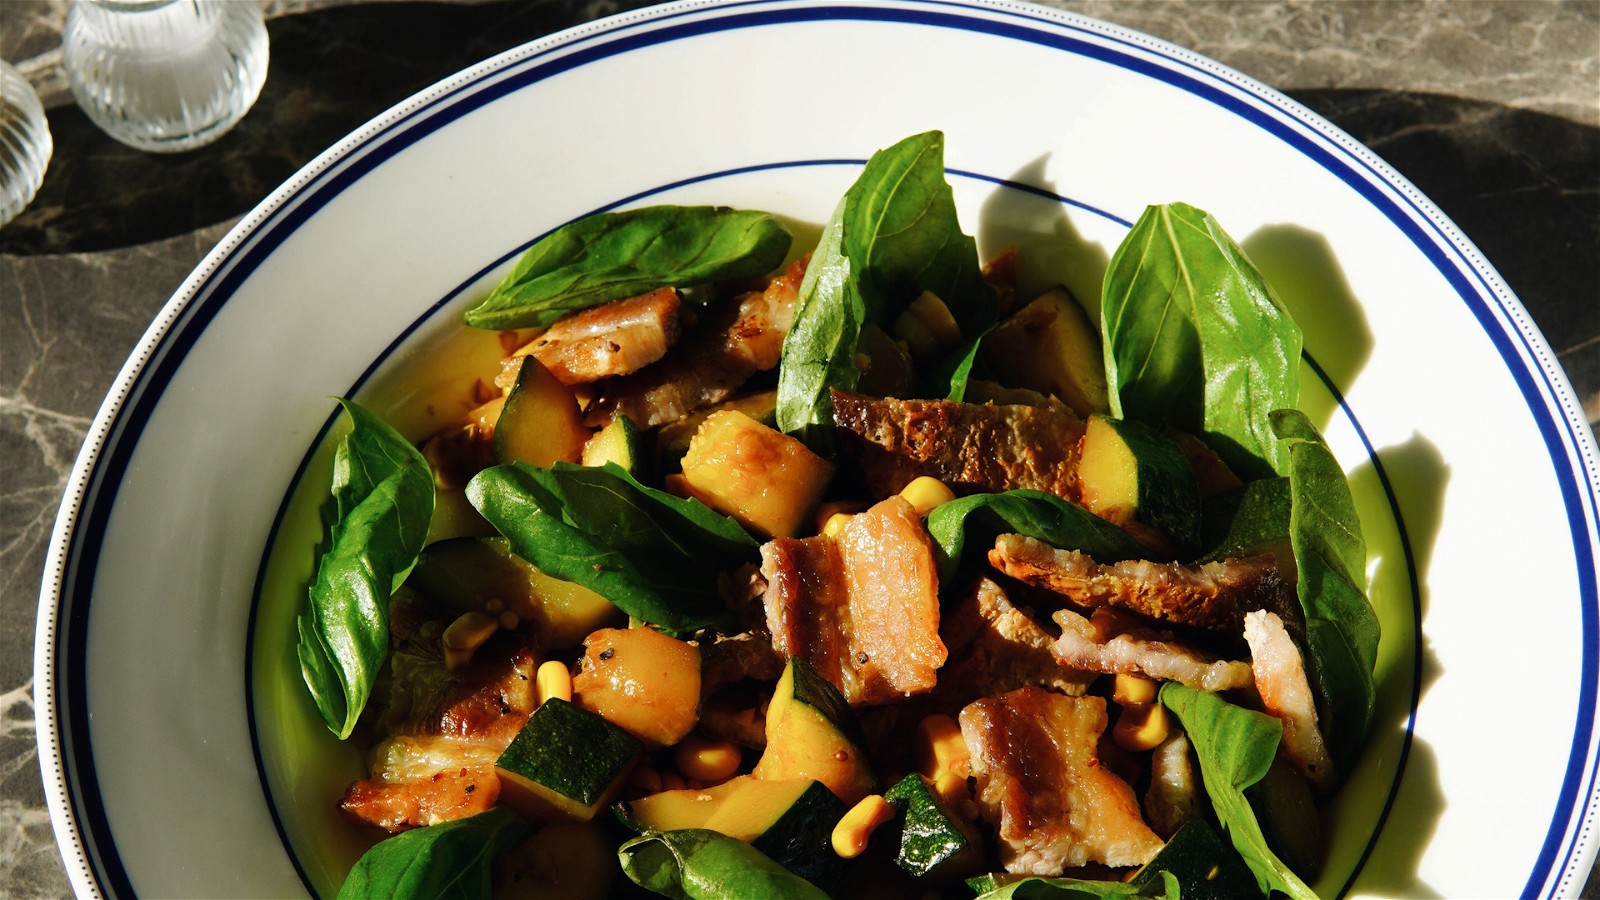 Image of Grilled Summer Squash and Corn Salad with Bacon